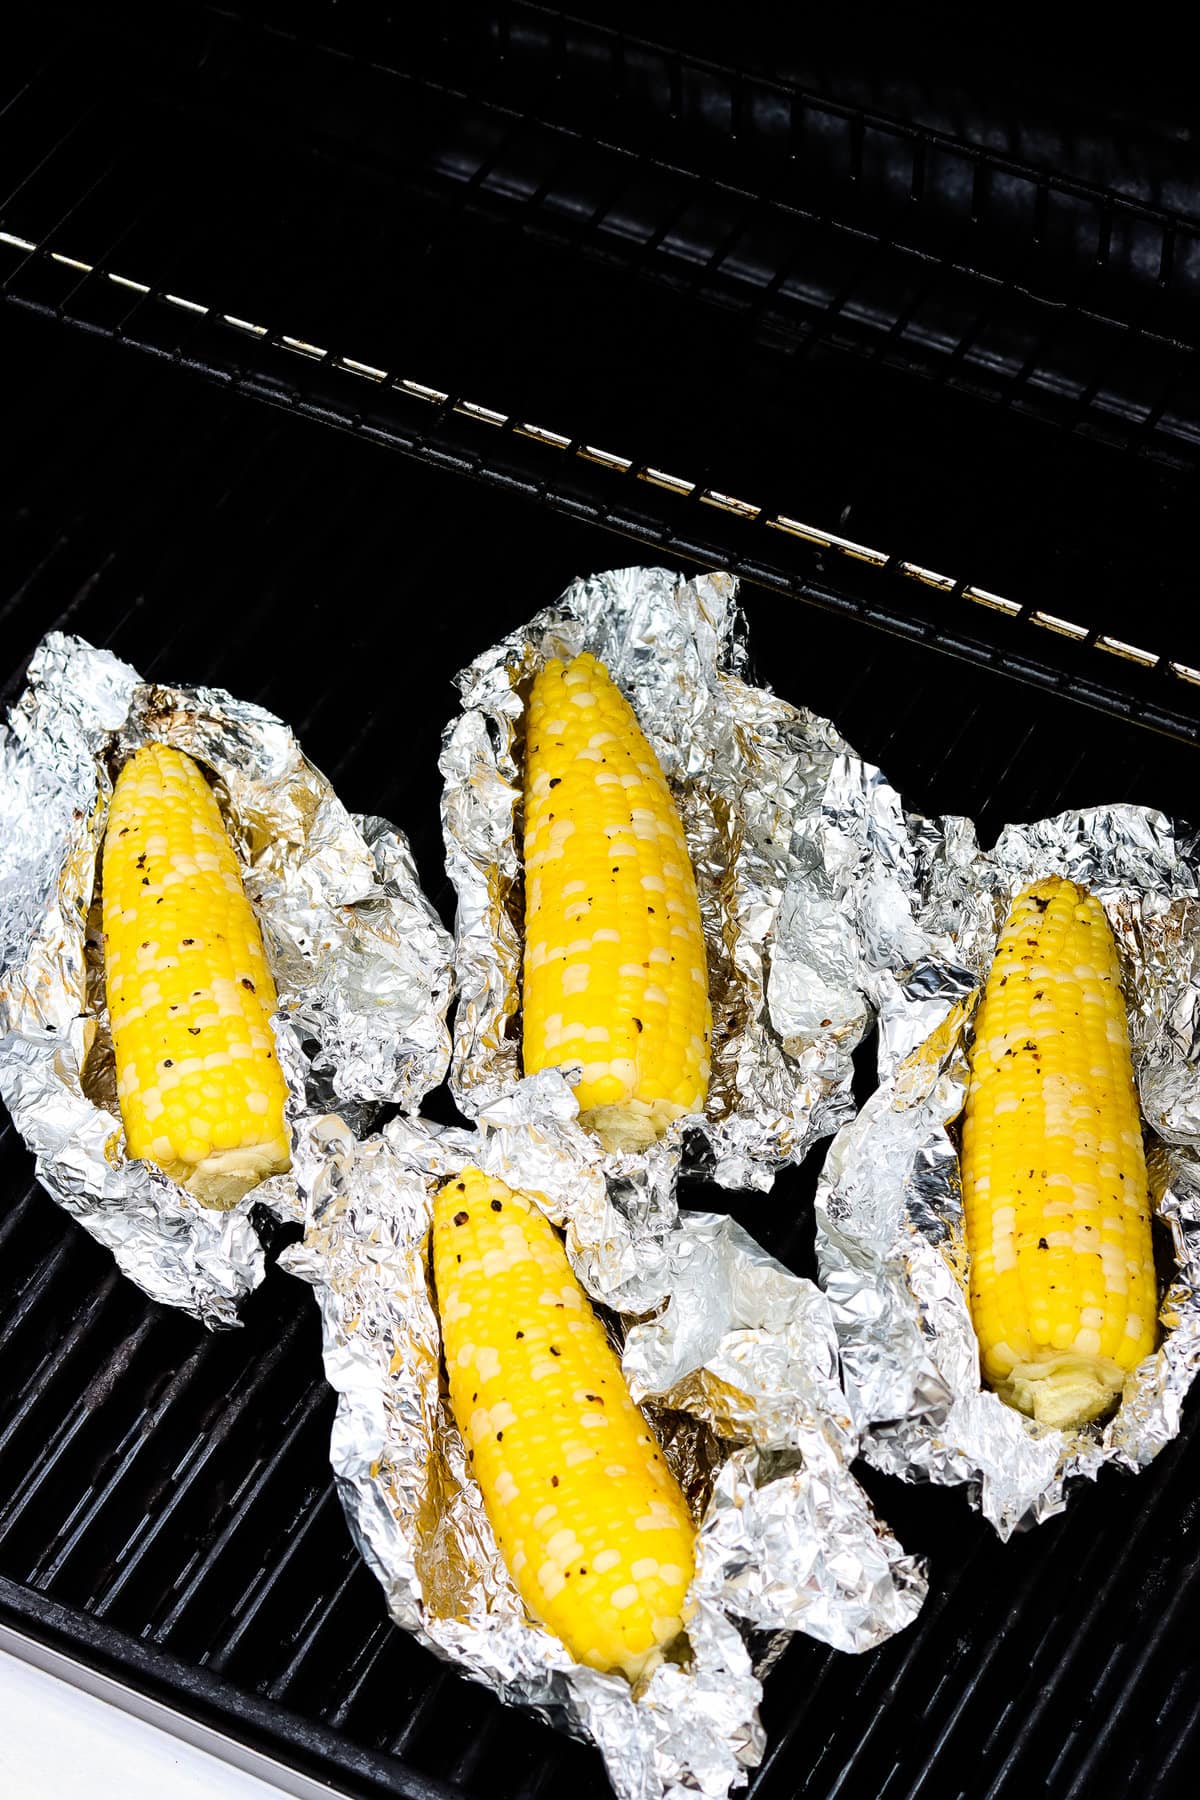 Unwrapped grilled corn on the cob in foil pieces